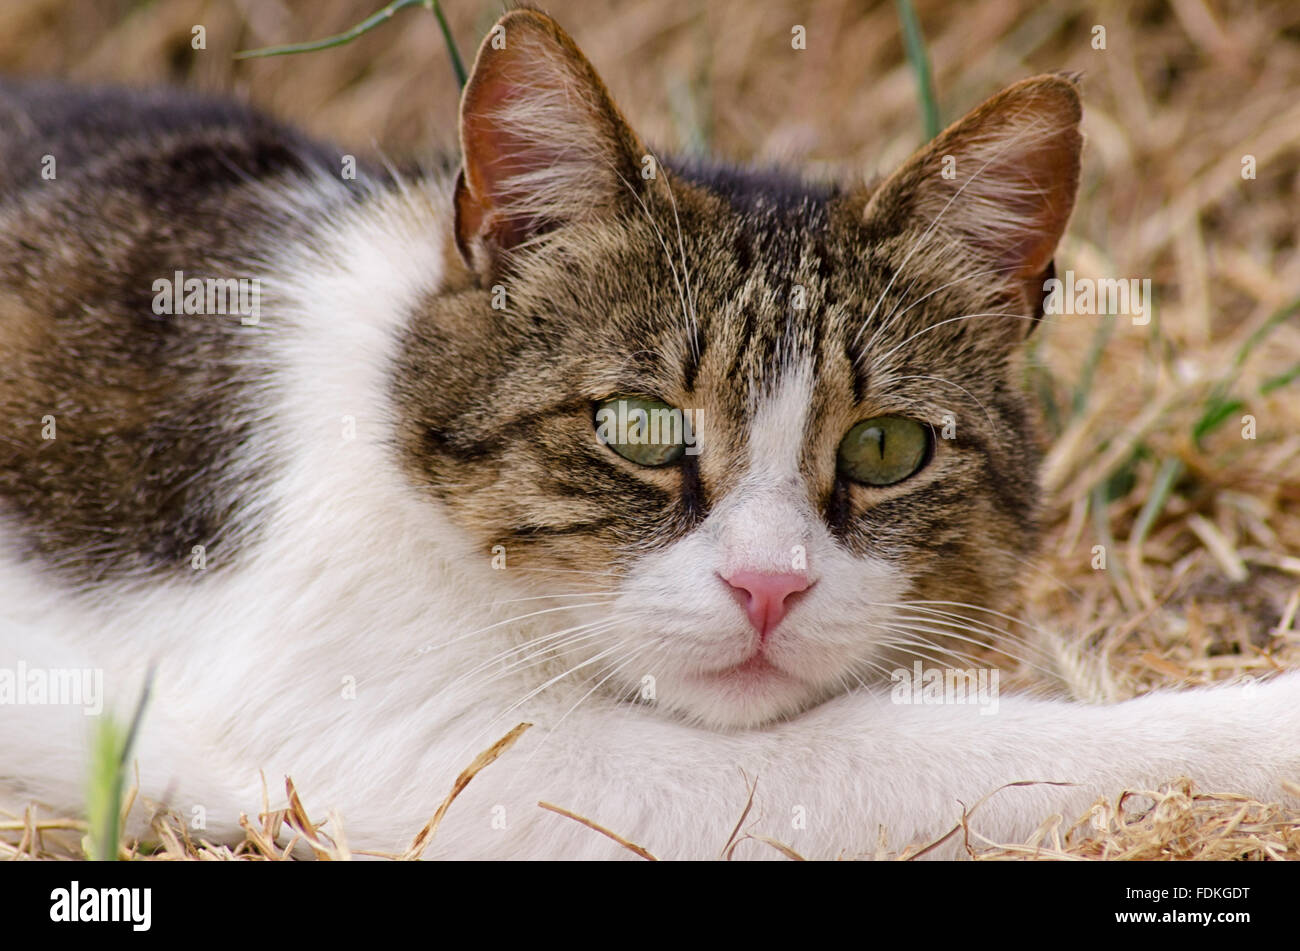 Cat lying in dry grass and looking straight at camera Stock Photo